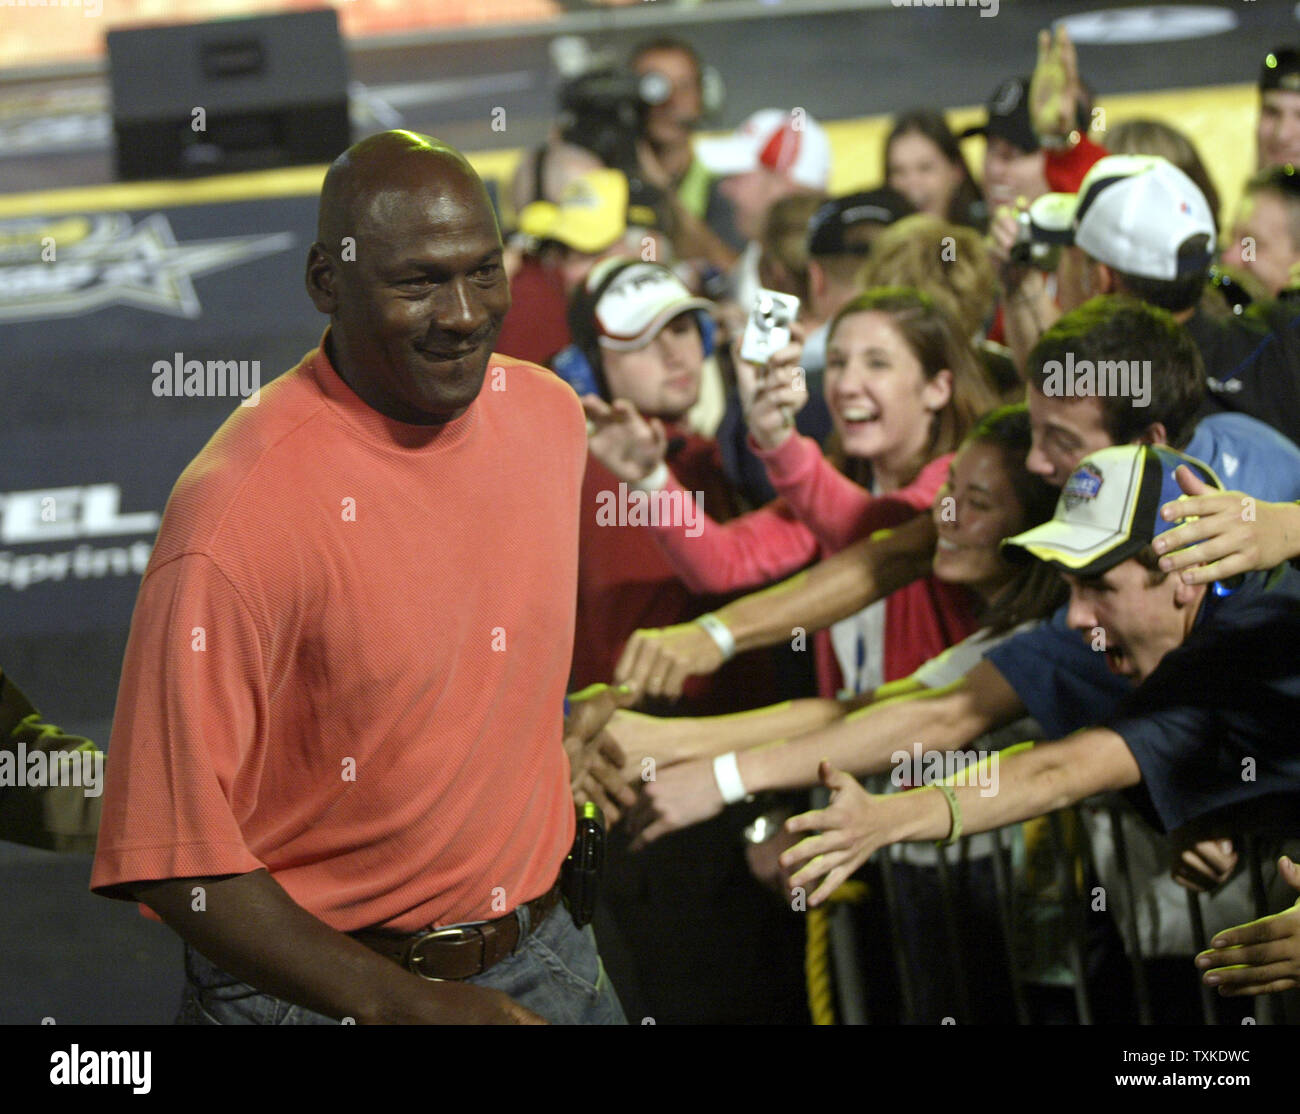 Fans reach for NBA legend Michael Jordan after he was introduced as the Grand Marshall of the NASCAR All-Star Challenge race at the Lowe's Motor Speedway near Charlotte, North Carolina on May 19, 2007. The All-Star Challenge is a special non-points race featuring NASCAR's top drivers racing for a record $3,264,364 purse.   (UPI Photo/Nell Redmond) Stock Photo